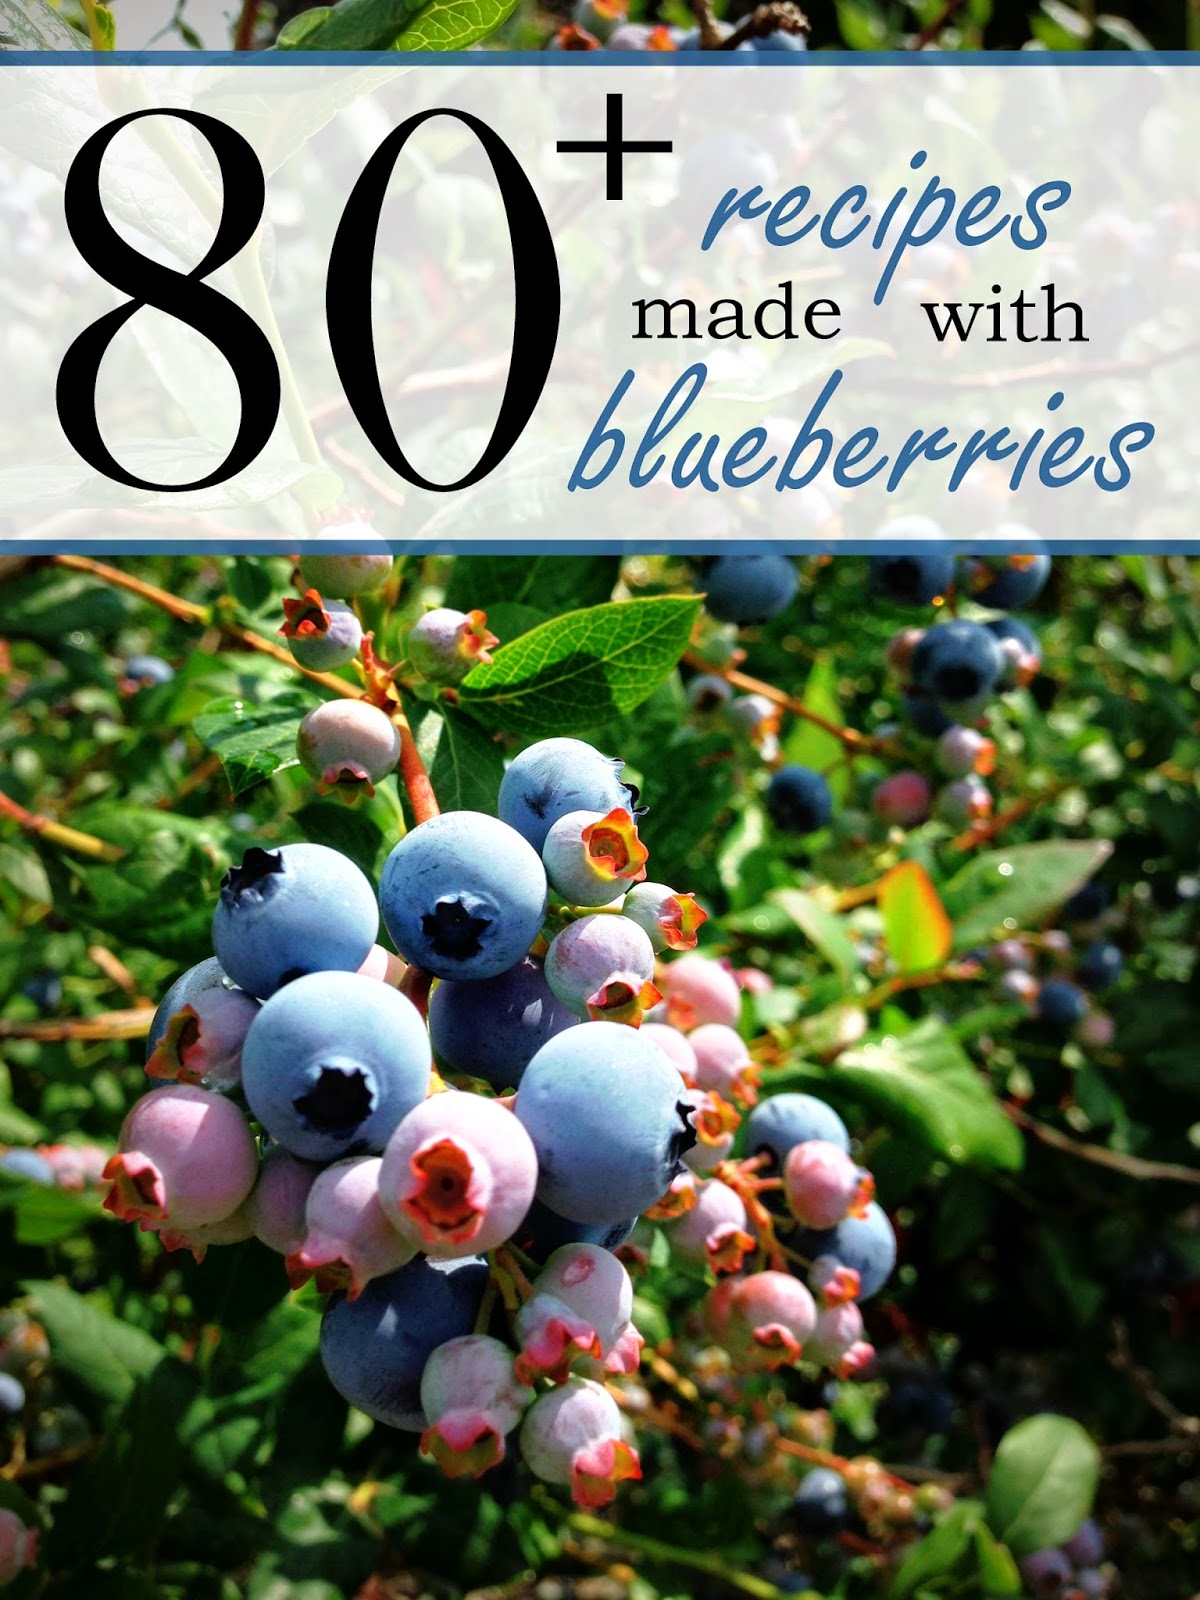 Hi! It's Jilly.: Blueberry Picking and 80+ Blueberry Recipes